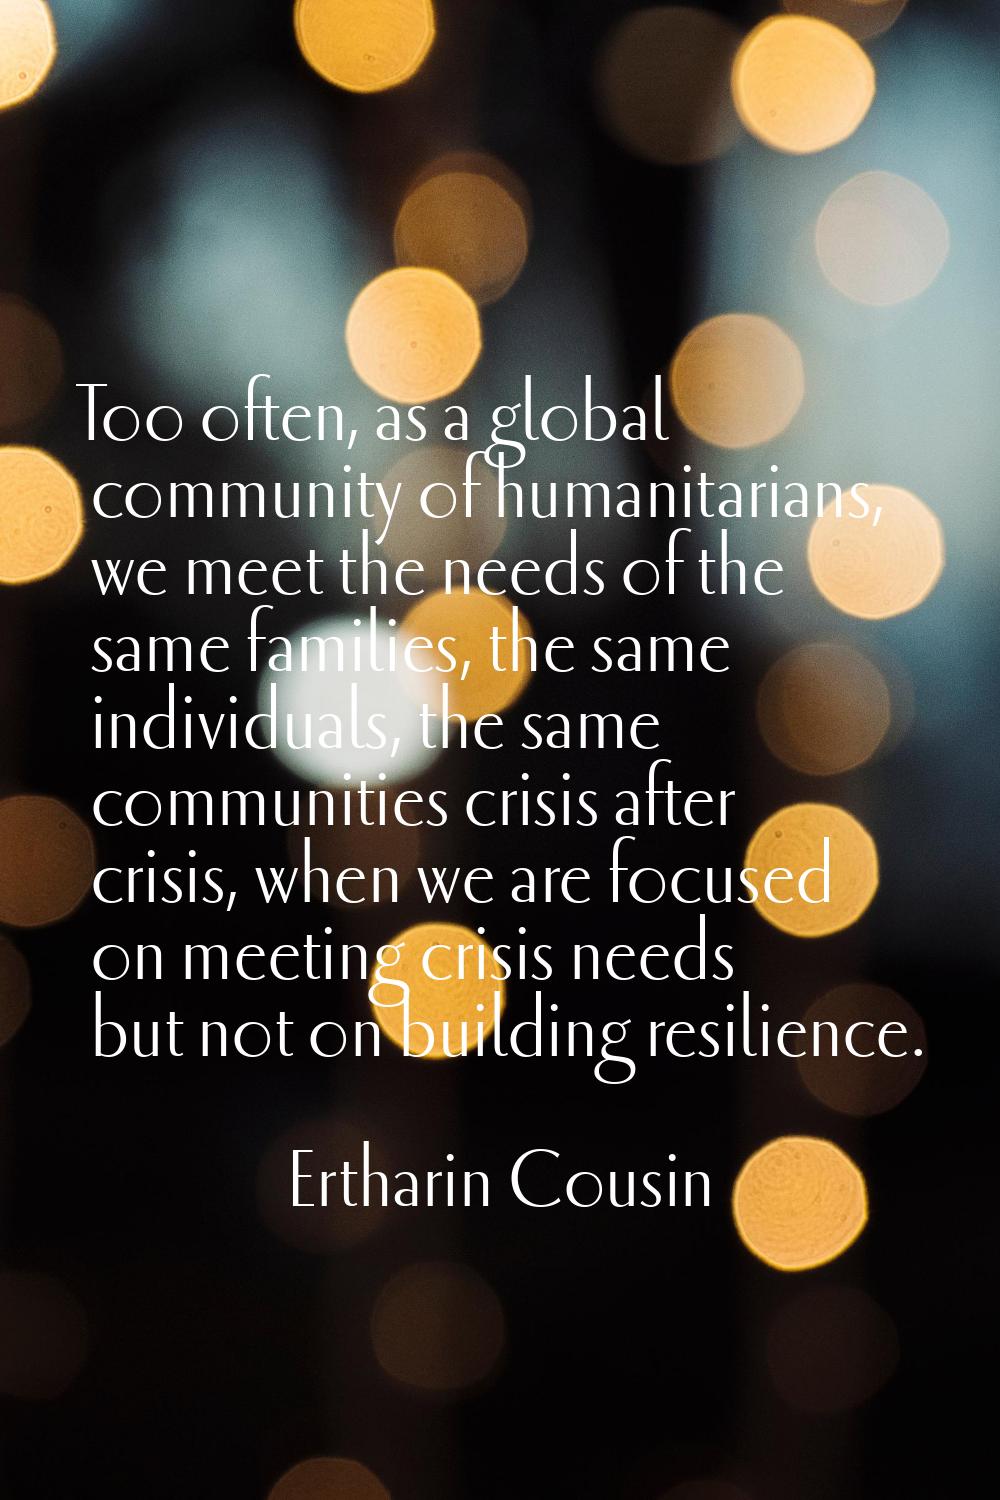 Too often, as a global community of humanitarians, we meet the needs of the same families, the same